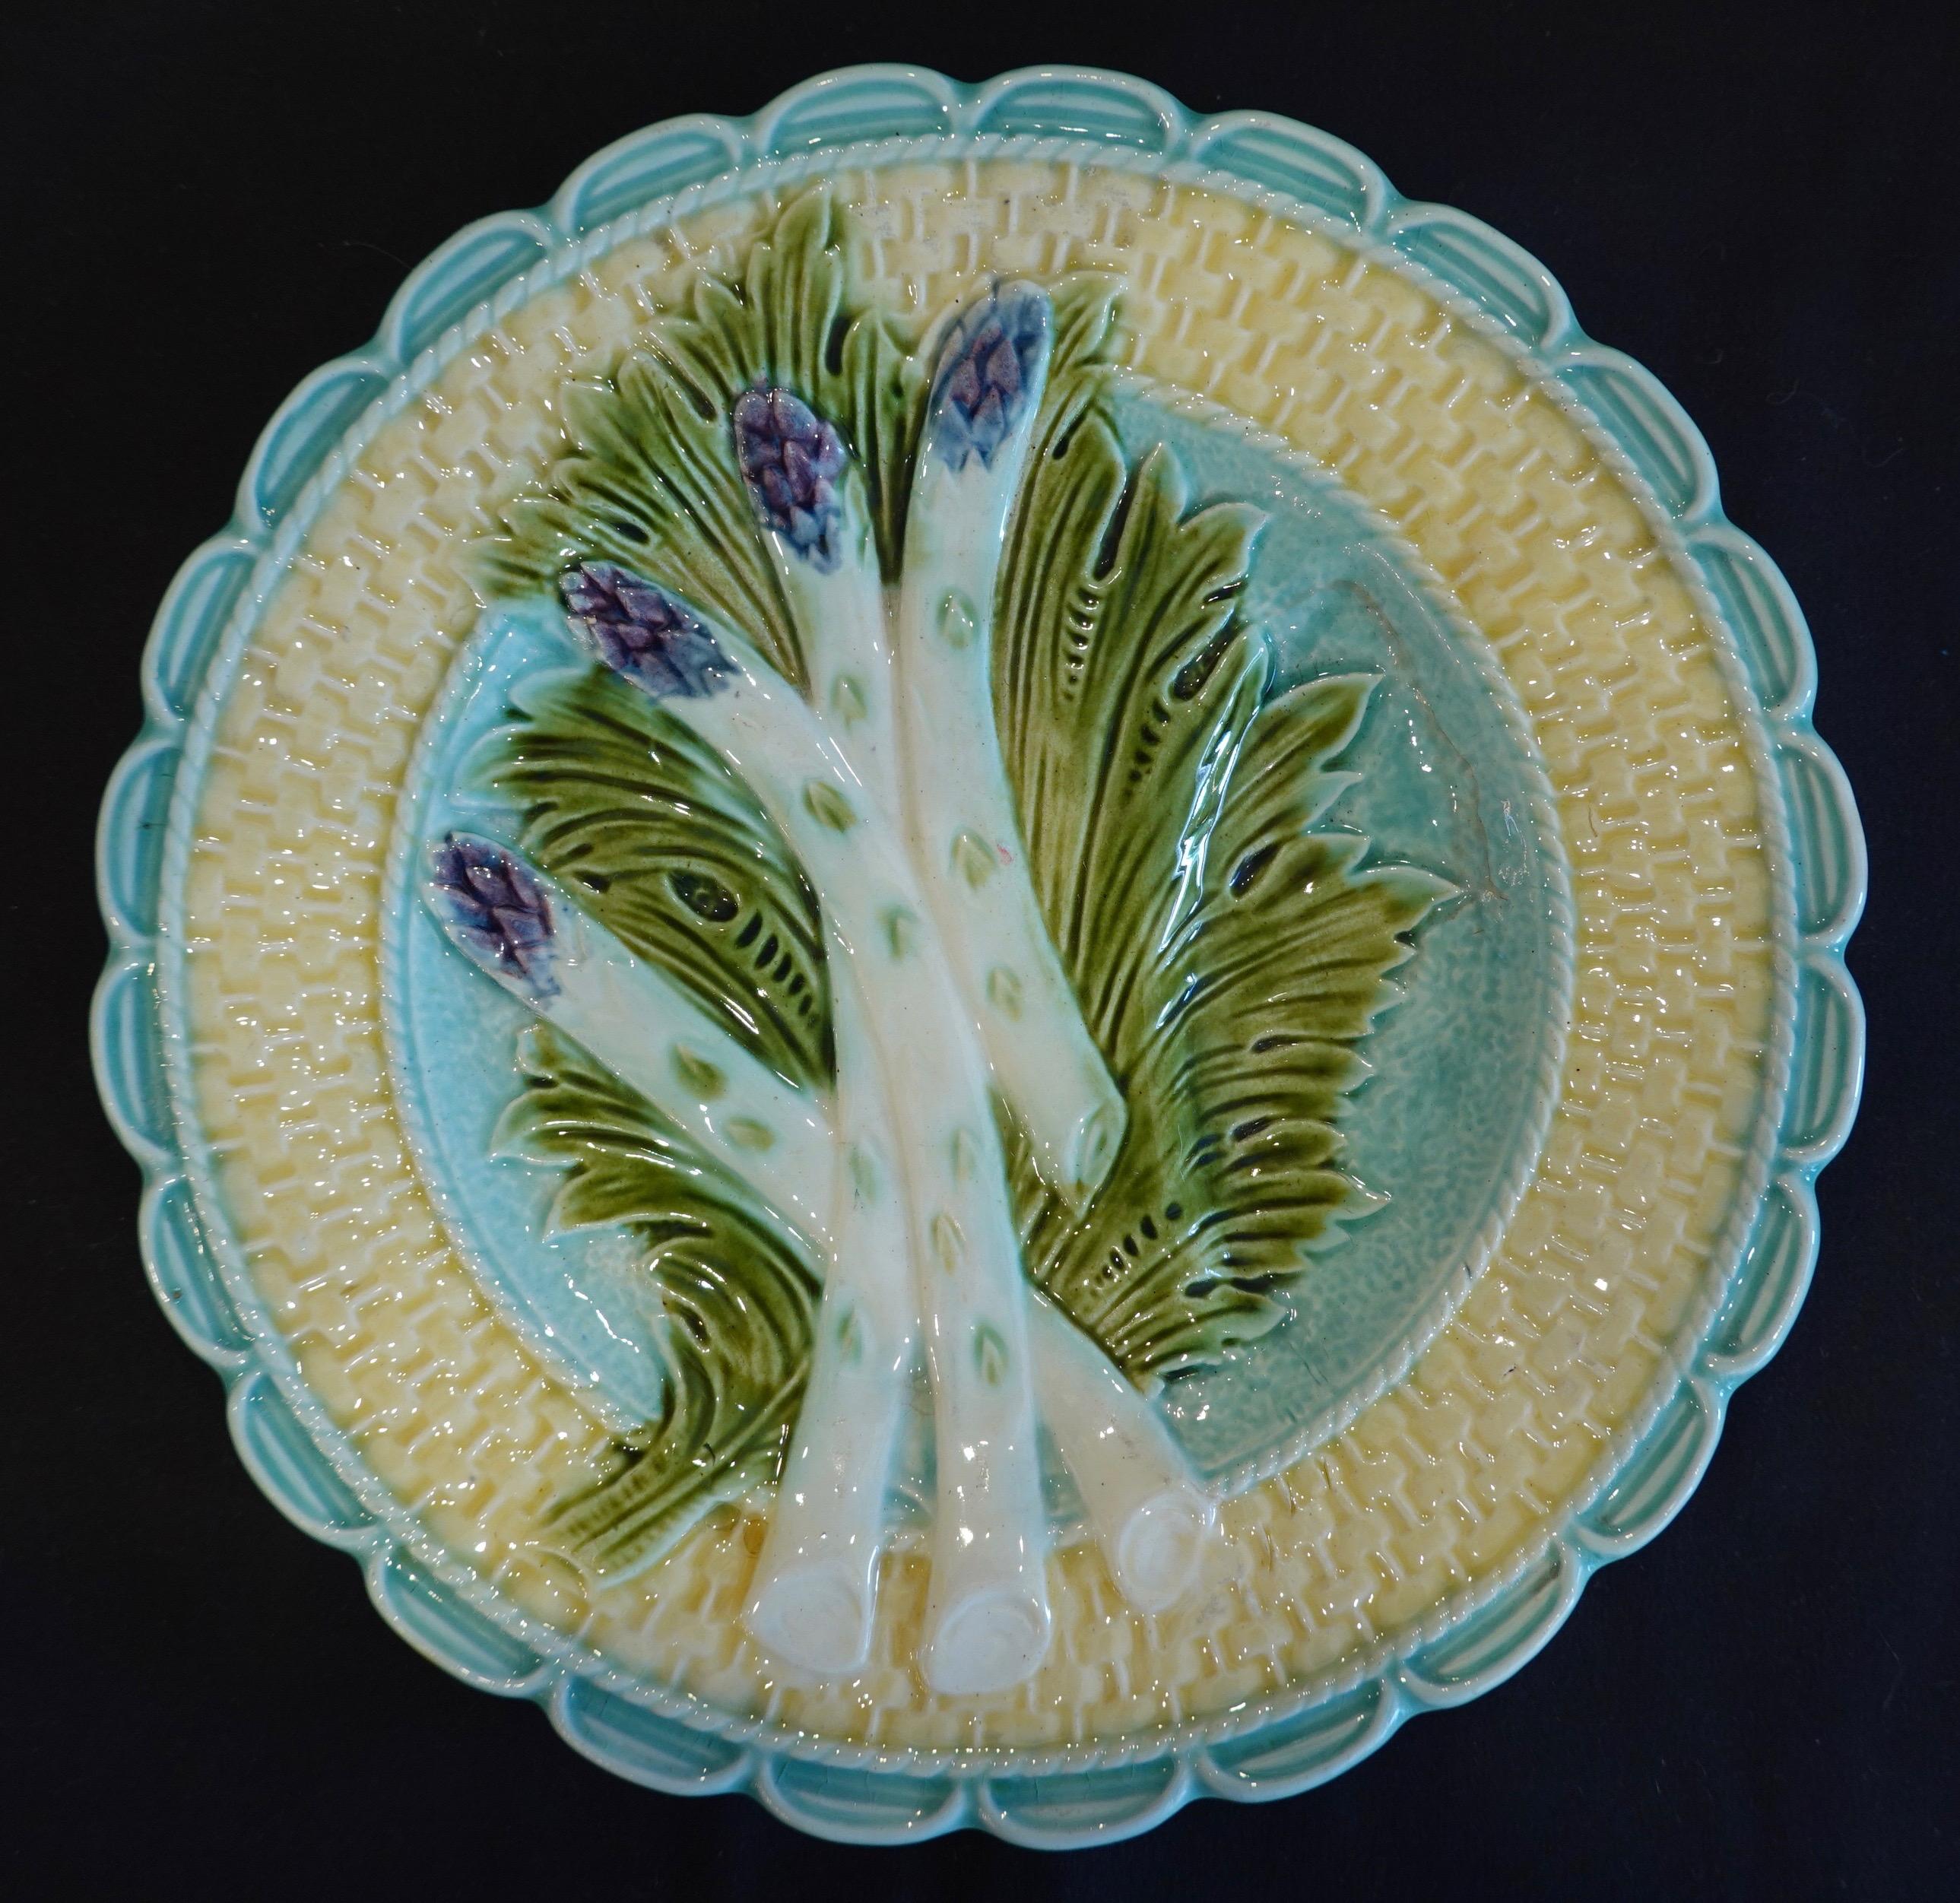 A colorful and highly-decorative Majolica asparagus plate featuring four asparagus spears resting on a leaf on a turquoise ground with tan basket weave around the edge. The plate is unmarked but clearly attributed to Salins.

The earthenware